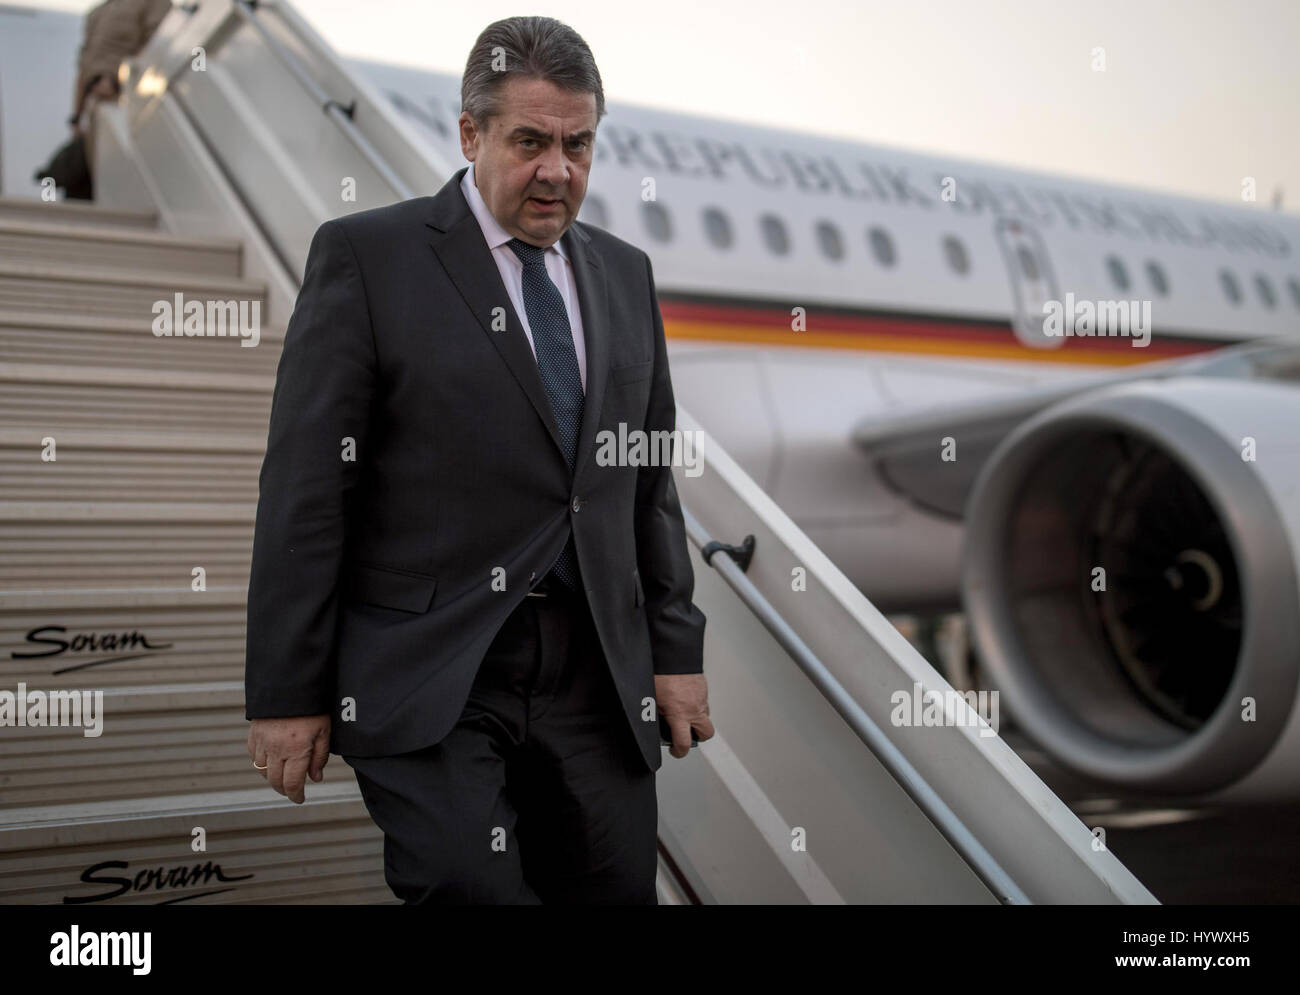 Bamako, Mali. 07th Apr, 2017. German Foreign Minister Sigmar Gabriel exits an Airbus of the German Armed Forces upon his arrival at the airport in Bamako, Mali, 07 April 2017. Gabriel is on his first visit to Africa in his capacity as Germany's Foreign Minister and is also scheduled to visit the German soldiers based in Gao, located in northern Mali. Photo: Michael Kappeler/dpa/Alamy Live News Stock Photo